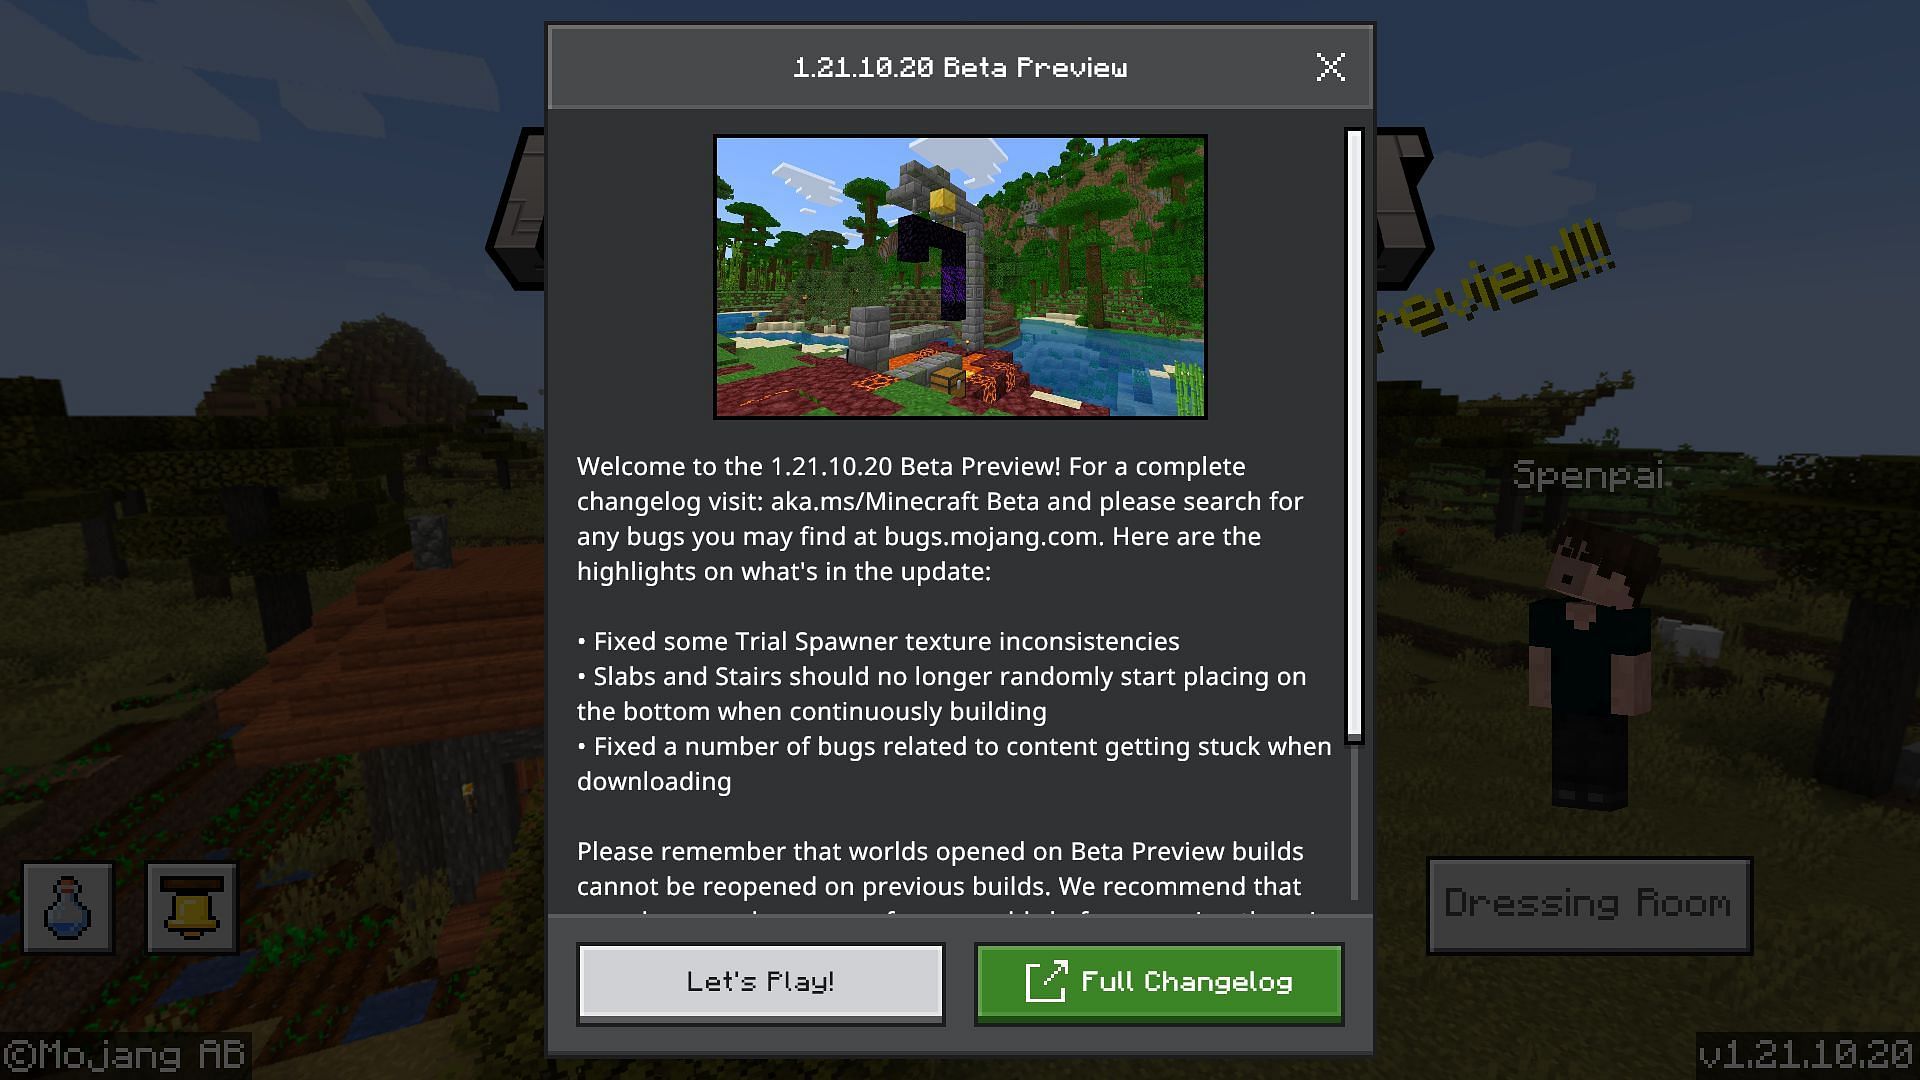 How to download Minecraft Bedrock 1.21.10.20 beta and preview